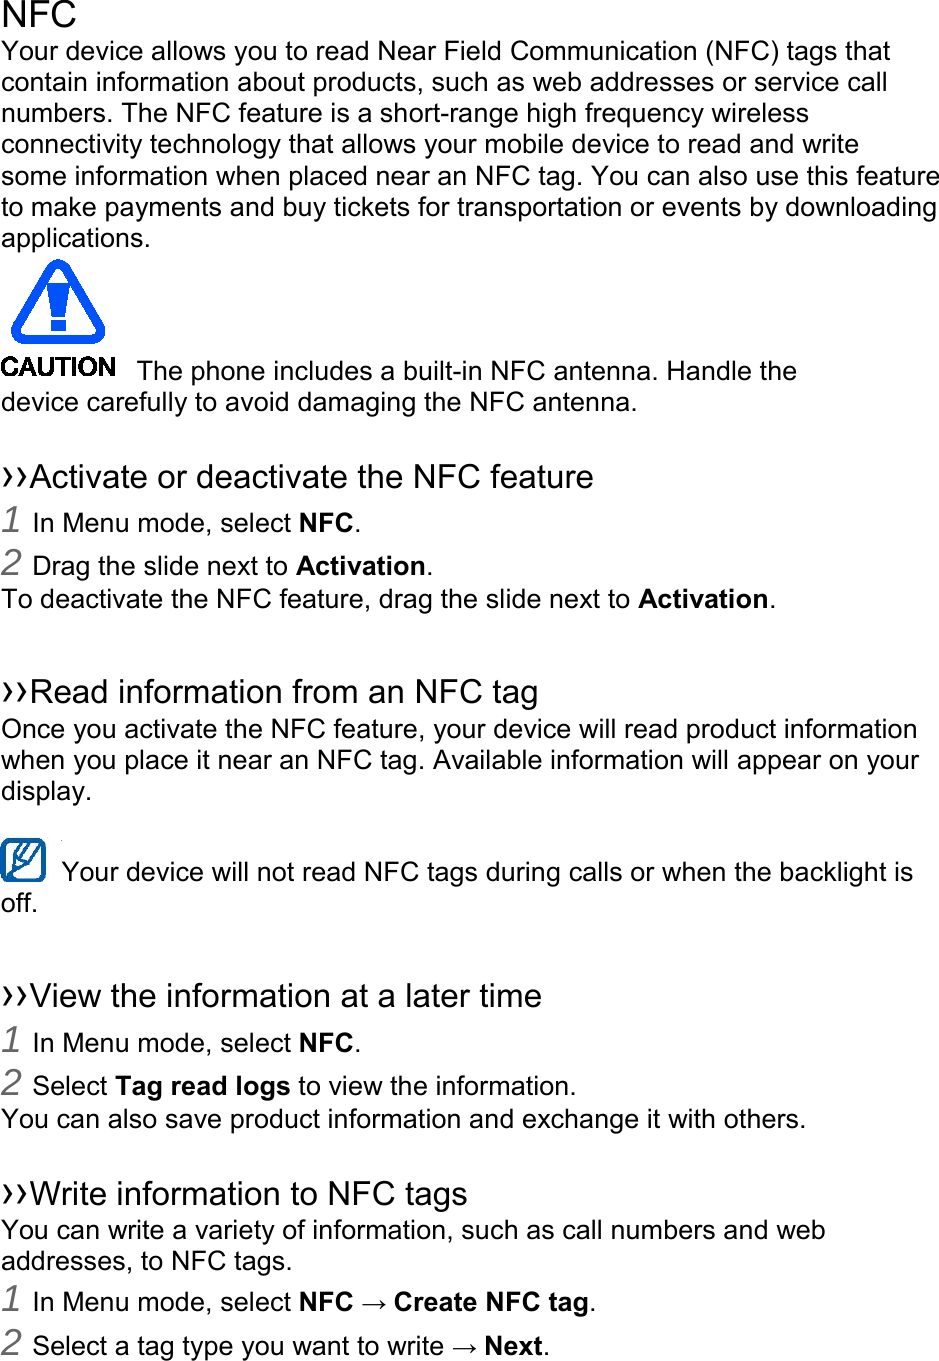    NFC Your device allows you to read Near Field Communication (NFC) tags that contain information about products, such as web addresses or service call numbers. The NFC feature is a short-range high frequency wireless connectivity technology that allows your mobile device to read and write some information when placed near an NFC tag. You can also use this feature to make payments and buy tickets for transportation or events by downloading applications.    The phone includes a built-in NFC antenna. Handle the device carefully to avoid damaging the NFC antenna.  ››Activate or deactivate the NFC feature 1 In Menu mode, select NFC. 2 Drag the slide next to Activation. To deactivate the NFC feature, drag the slide next to Activation.  ››Read information from an NFC tag Once you activate the NFC feature, your device will read product information when you place it near an NFC tag. Available information will appear on your display.  Your device will not read NFC tags during calls or when the backlight is   off.  ››View the information at a later time 1 In Menu mode, select NFC. 2 Select Tag read logs to view the information. You can also save product information and exchange it with others.  ››Write information to NFC tags   You can write a variety of information, such as call numbers and web addresses, to NFC tags. 1 In Menu mode, select NFC → Create NFC tag. 2 Select a tag type you want to write → Next. 